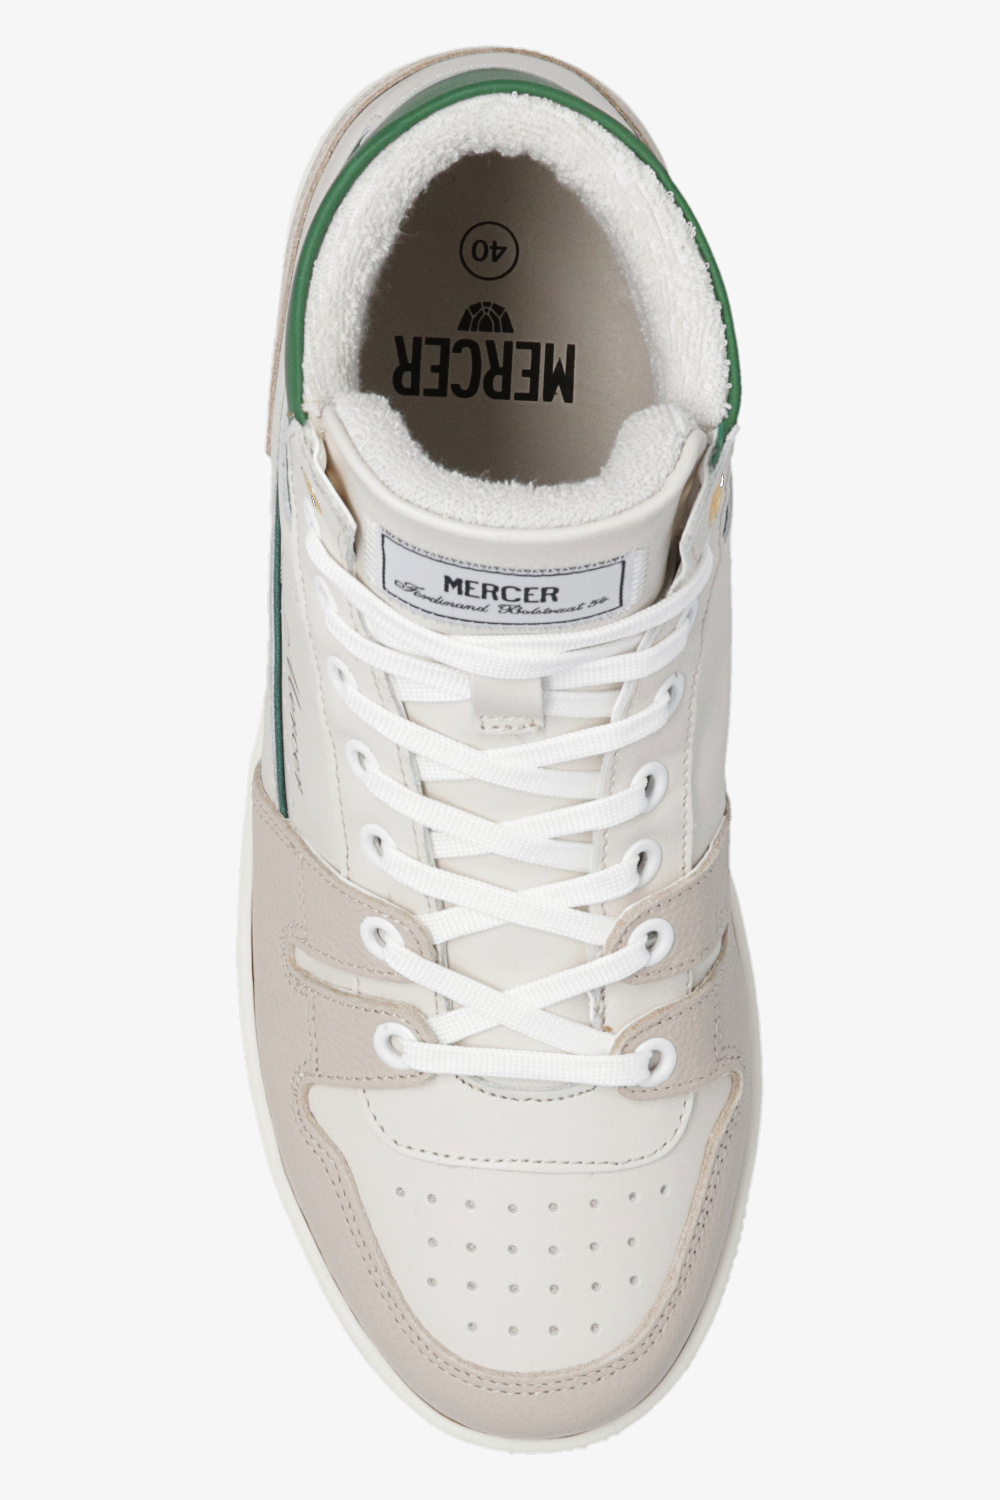 Mercer Amsterdam THE BROOKLYN HIGH White / Green - Free delivery